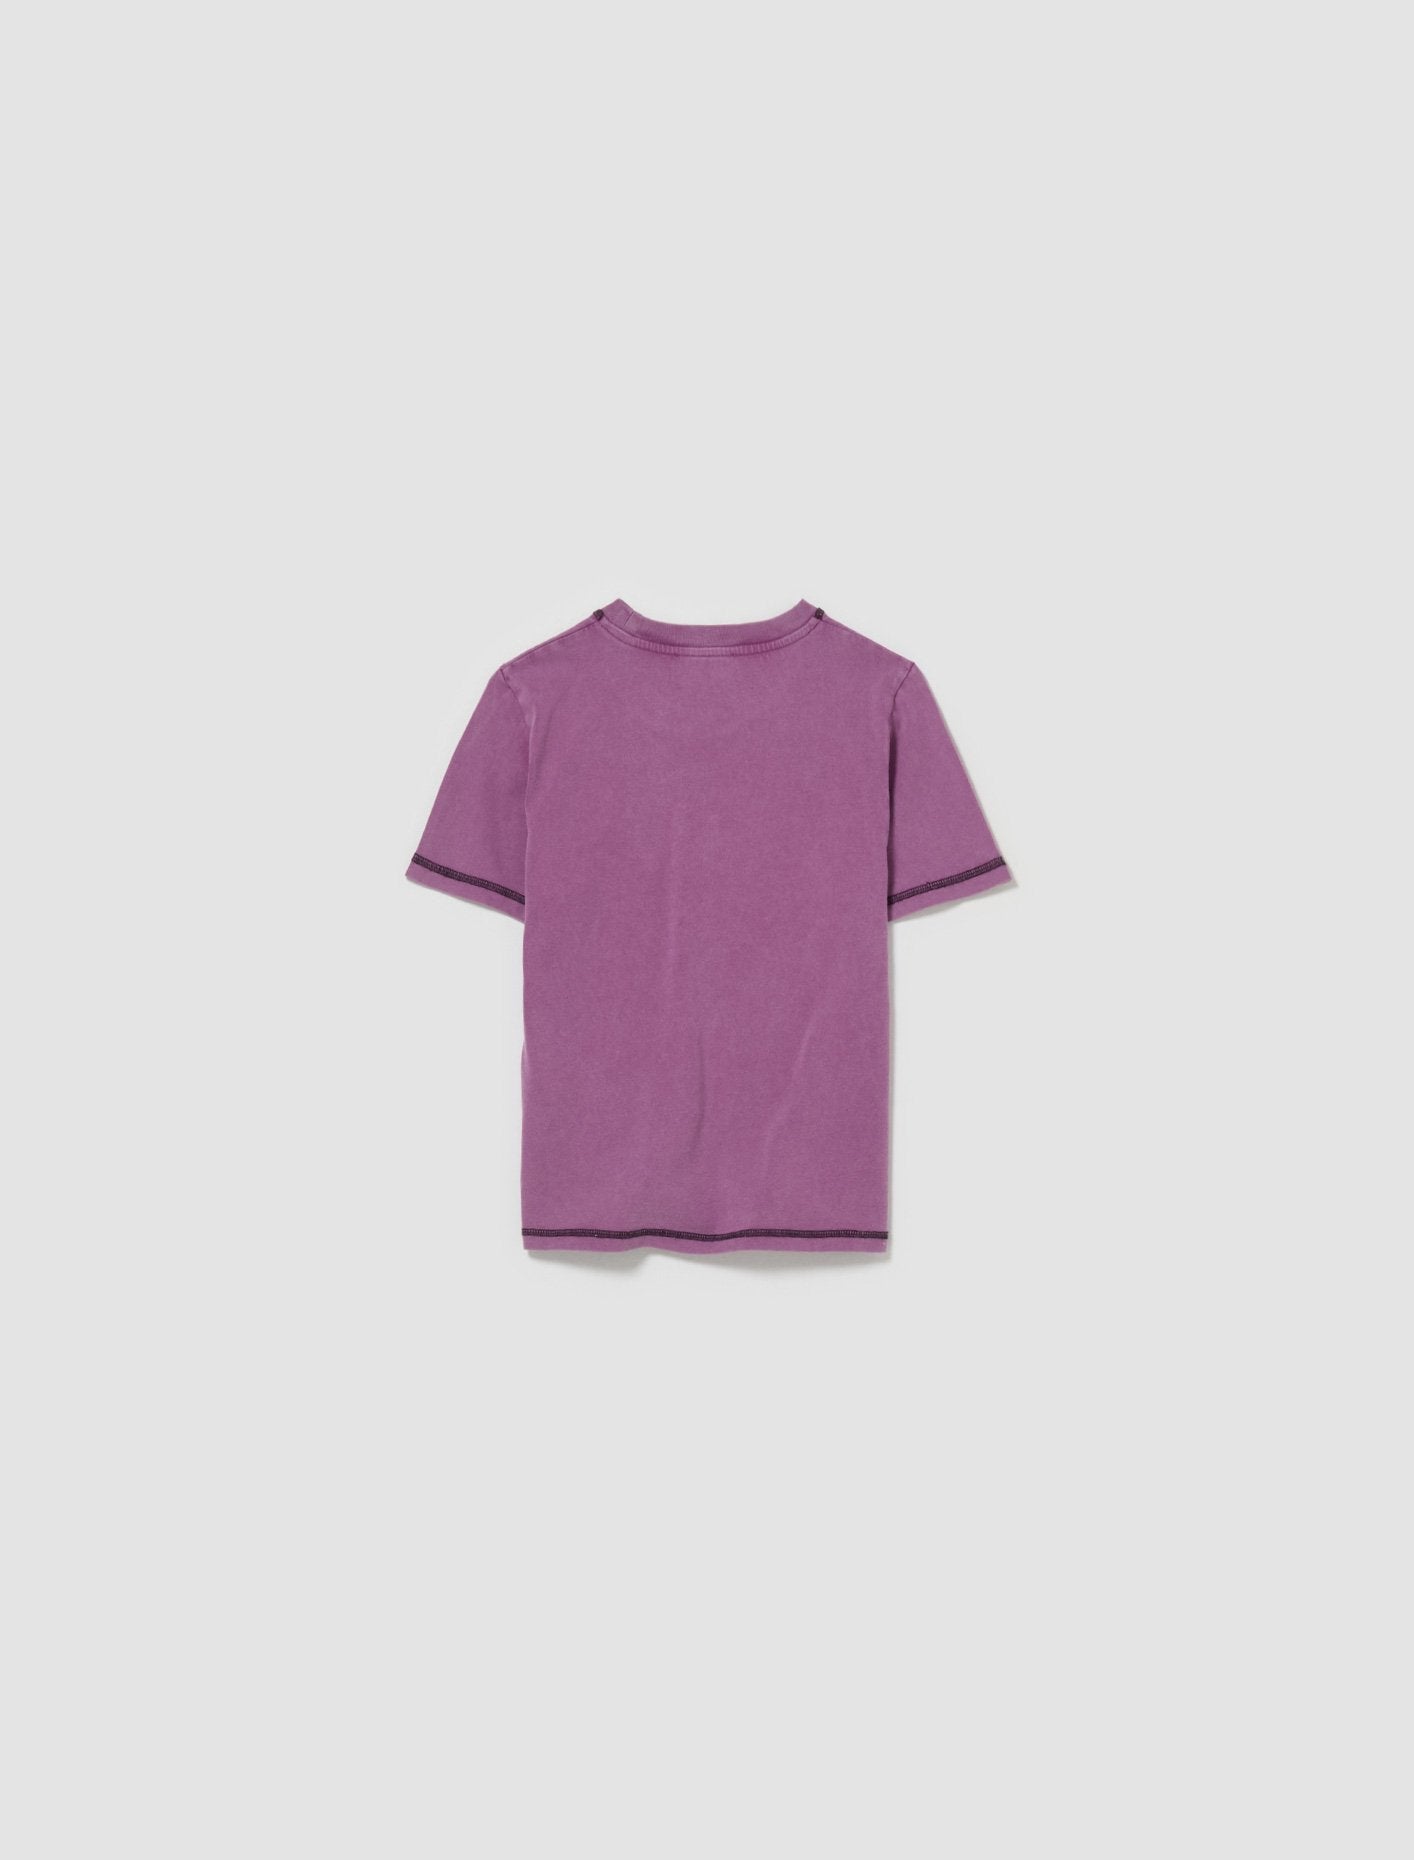 Two Better Than One T-Shirt in Washed Purple